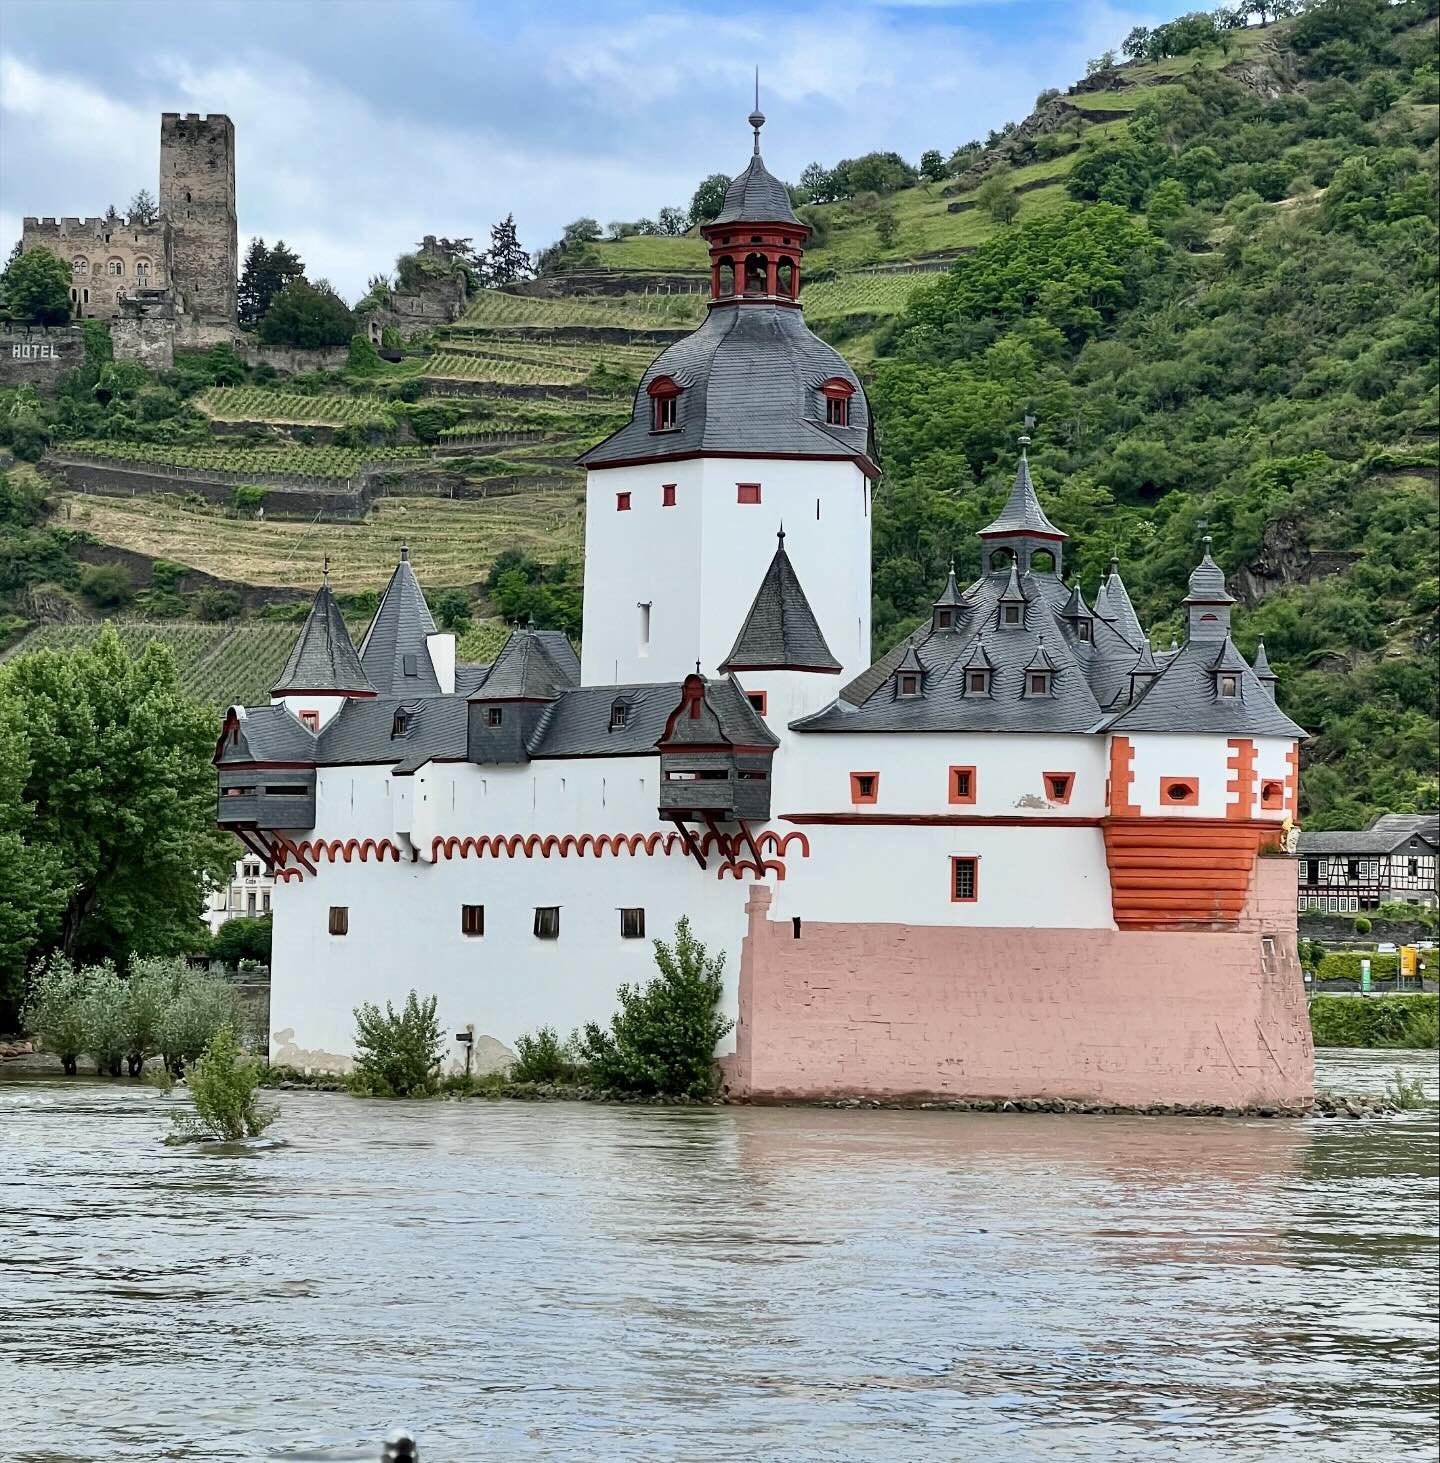 The wonderful afternoon of cruising the river - sailing the Rhine Gorge- with the part that has all the castles, with a castle visit at the end! #jeannettedouglasdesigns  #jeannettedouglas ##jddtravels  #rhinerivergorge  #castles